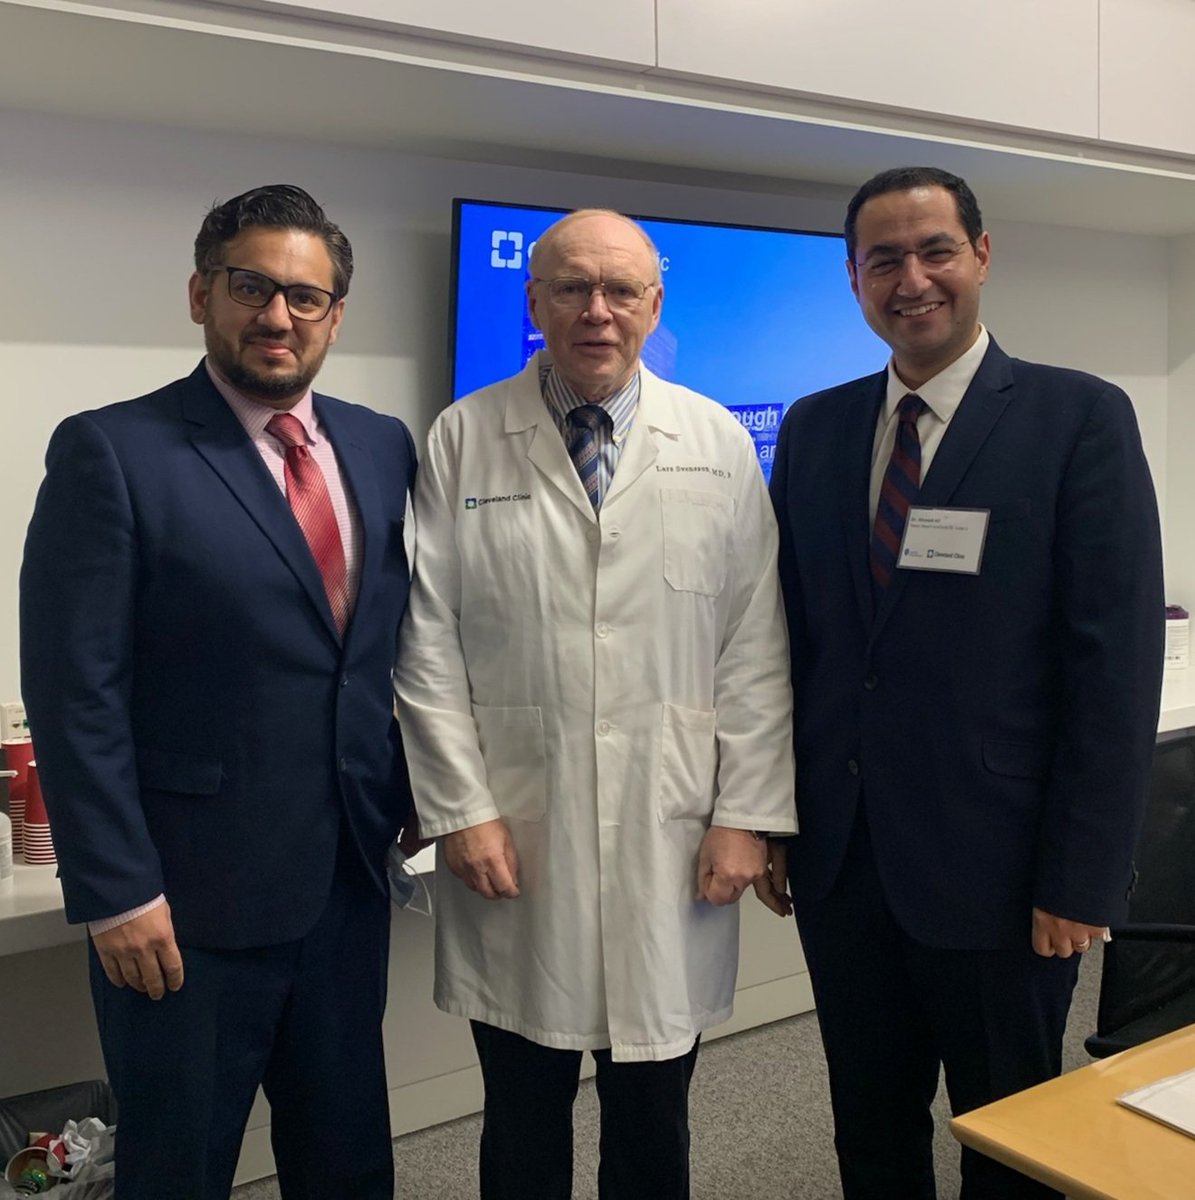 Honored and humbled to connect with the great mentors at the Cleveland Clinic with @Ahmedkyali.

The @Texas_Heart @BCM_CTSurgery crew with @LarsSvenssonMD.

Thank you @AATSHQ @AATSED @CleClinicMD, @LarsSvenssonMD, @EricRoselliMD, @karamlou for providing the great opportunity.